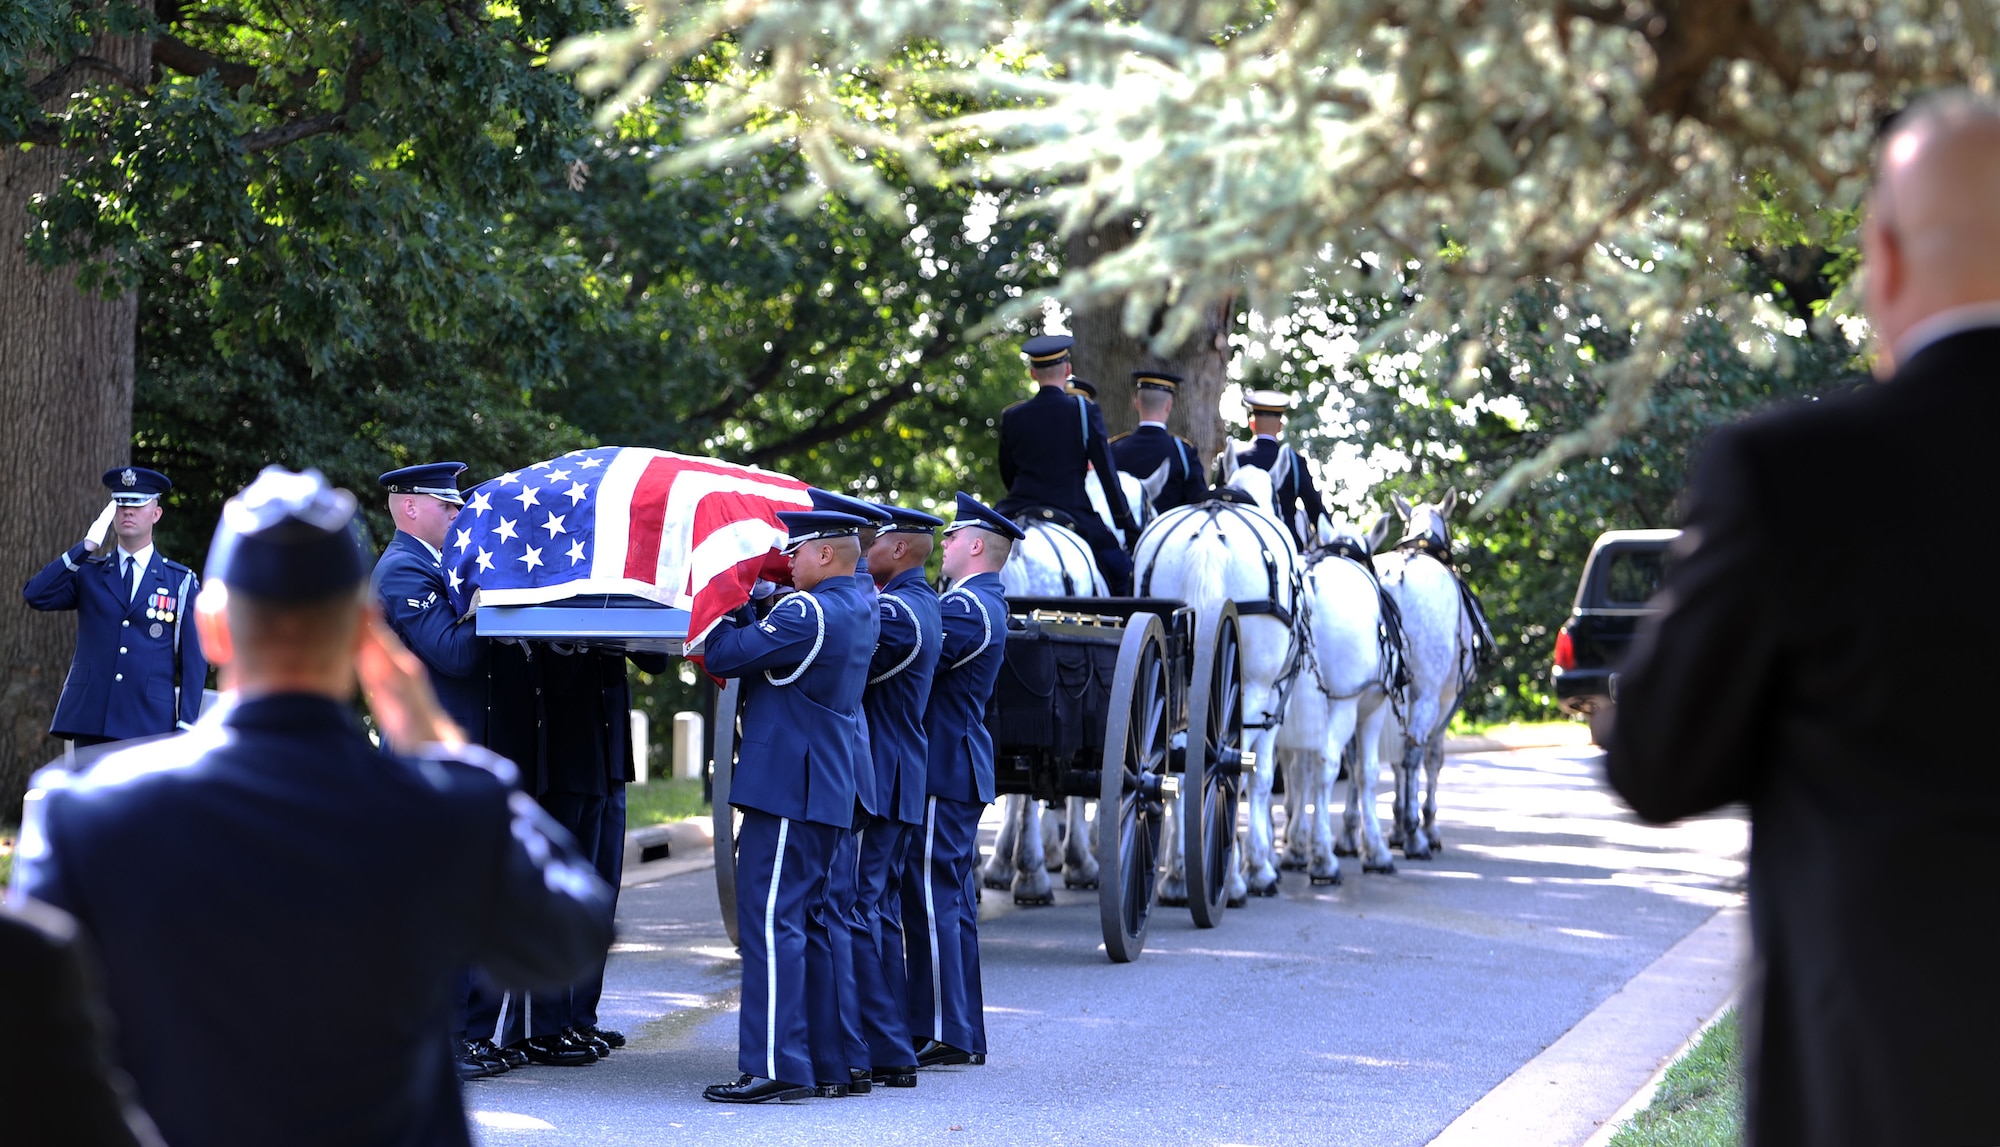 Members of the Air Force Honor Guard prepare to position the casket of retired Col. John Carey in its final resting place at Arlington National Cemetery Aug. 12, 2011. Carey, a veteran with more than 30 years of service to his country, received full military honors during the service including an F-15E Strike Eagle missing man flyby. (U.S. Air Force photo/Staff Sgt. Tiffany Trojca)